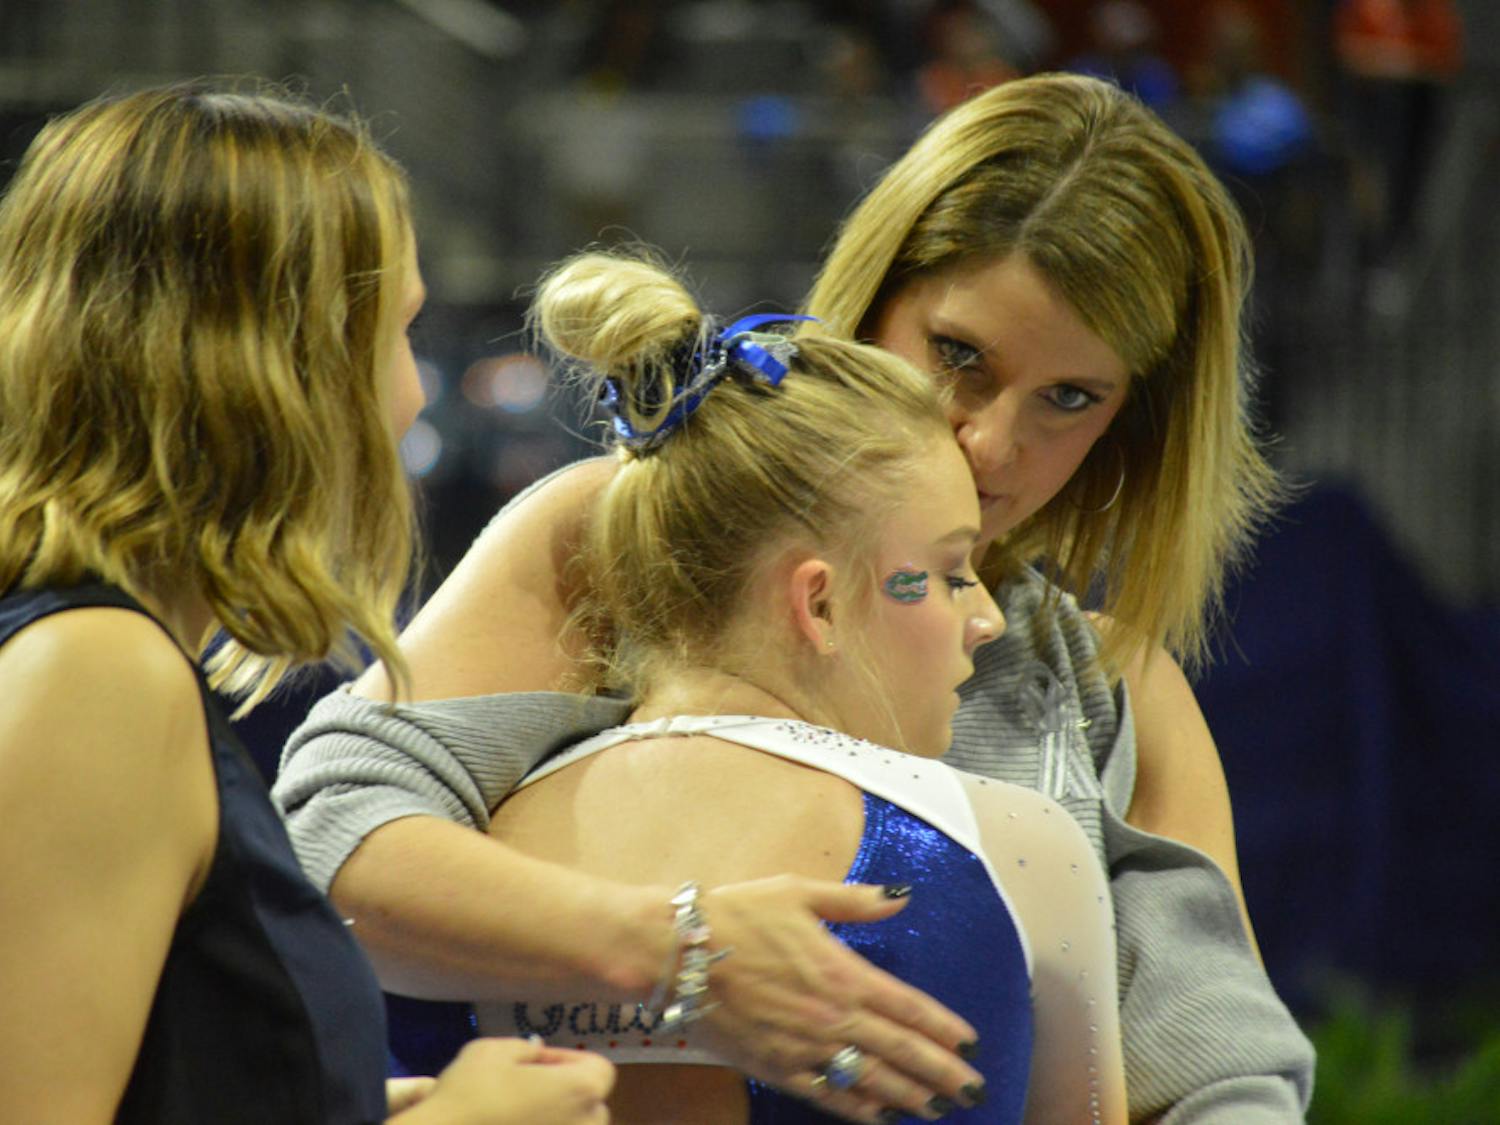 Gymnastics coach Jenny Rowland said her team's improvement throughout its first three meets is apparent, culminating in its win against Kentucky on Friday. “We worked better together as a team,” Rowland said. “The energy was fantastic.”